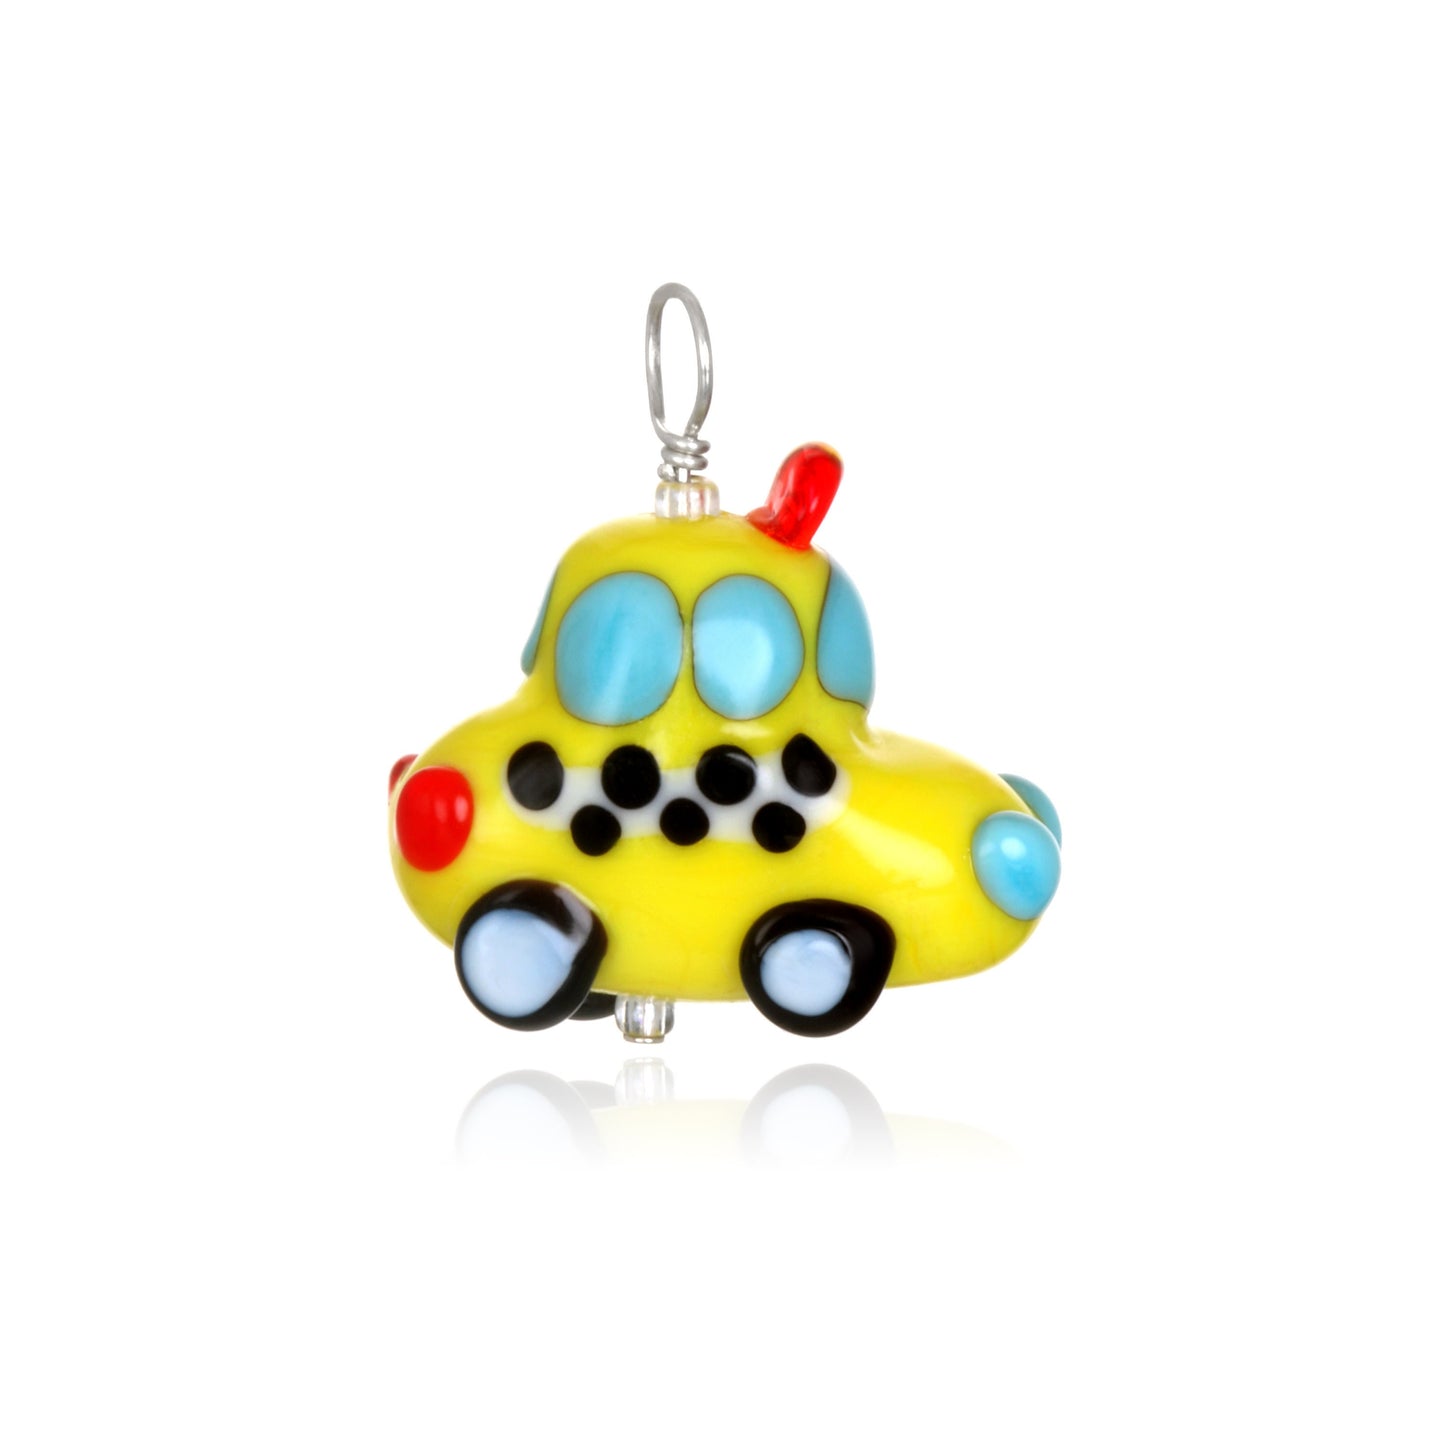 Glass Taxi Cab Pendant on Leather